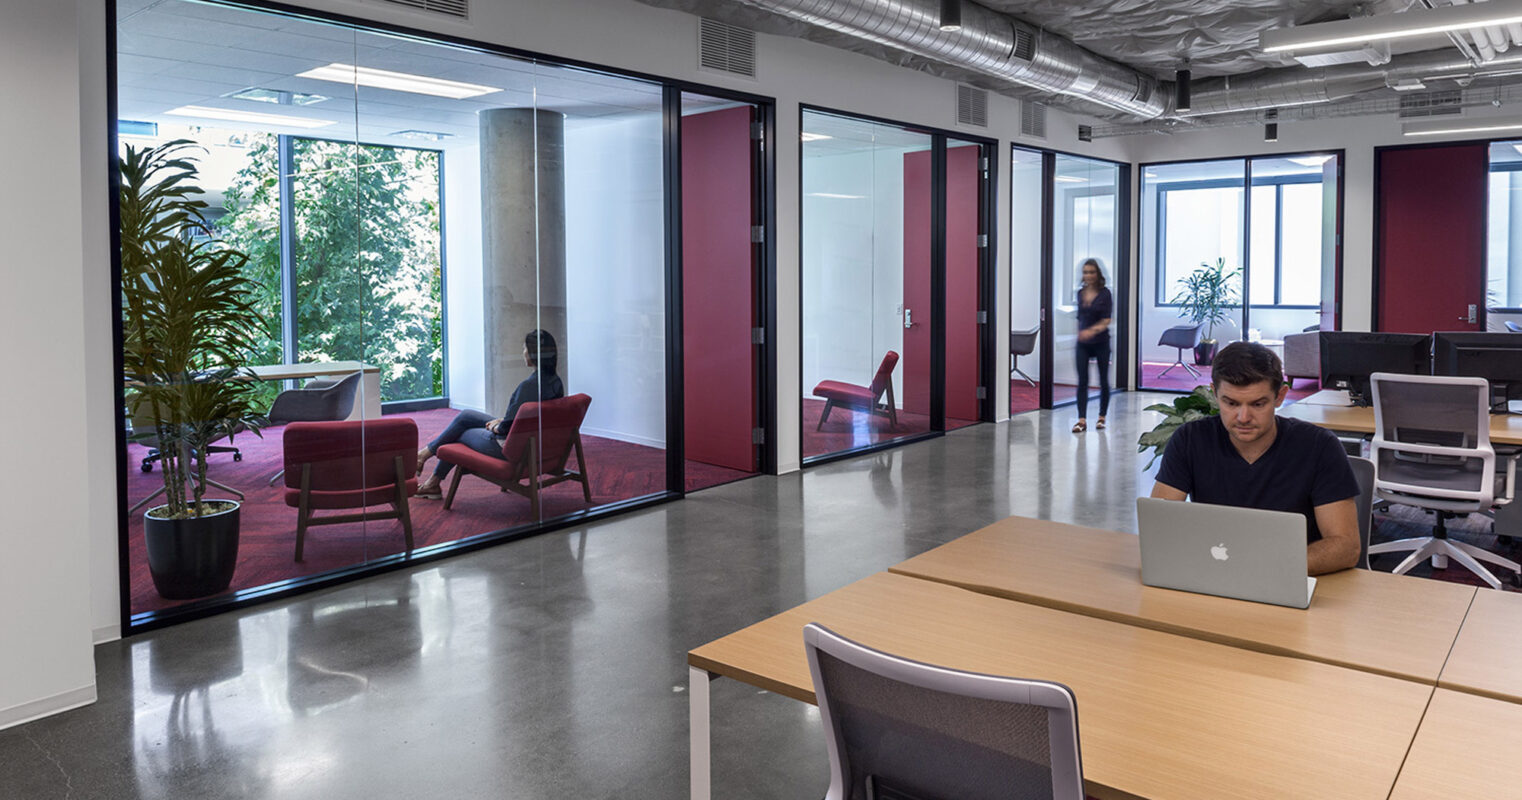 Modern office interior with floor-to-ceiling glass partitions, framing a breakout space with red armchairs and a coffee table. Strategically placed greenery complements the natural light, while a focused individual works at a sleek, communal wooden table in the foreground.